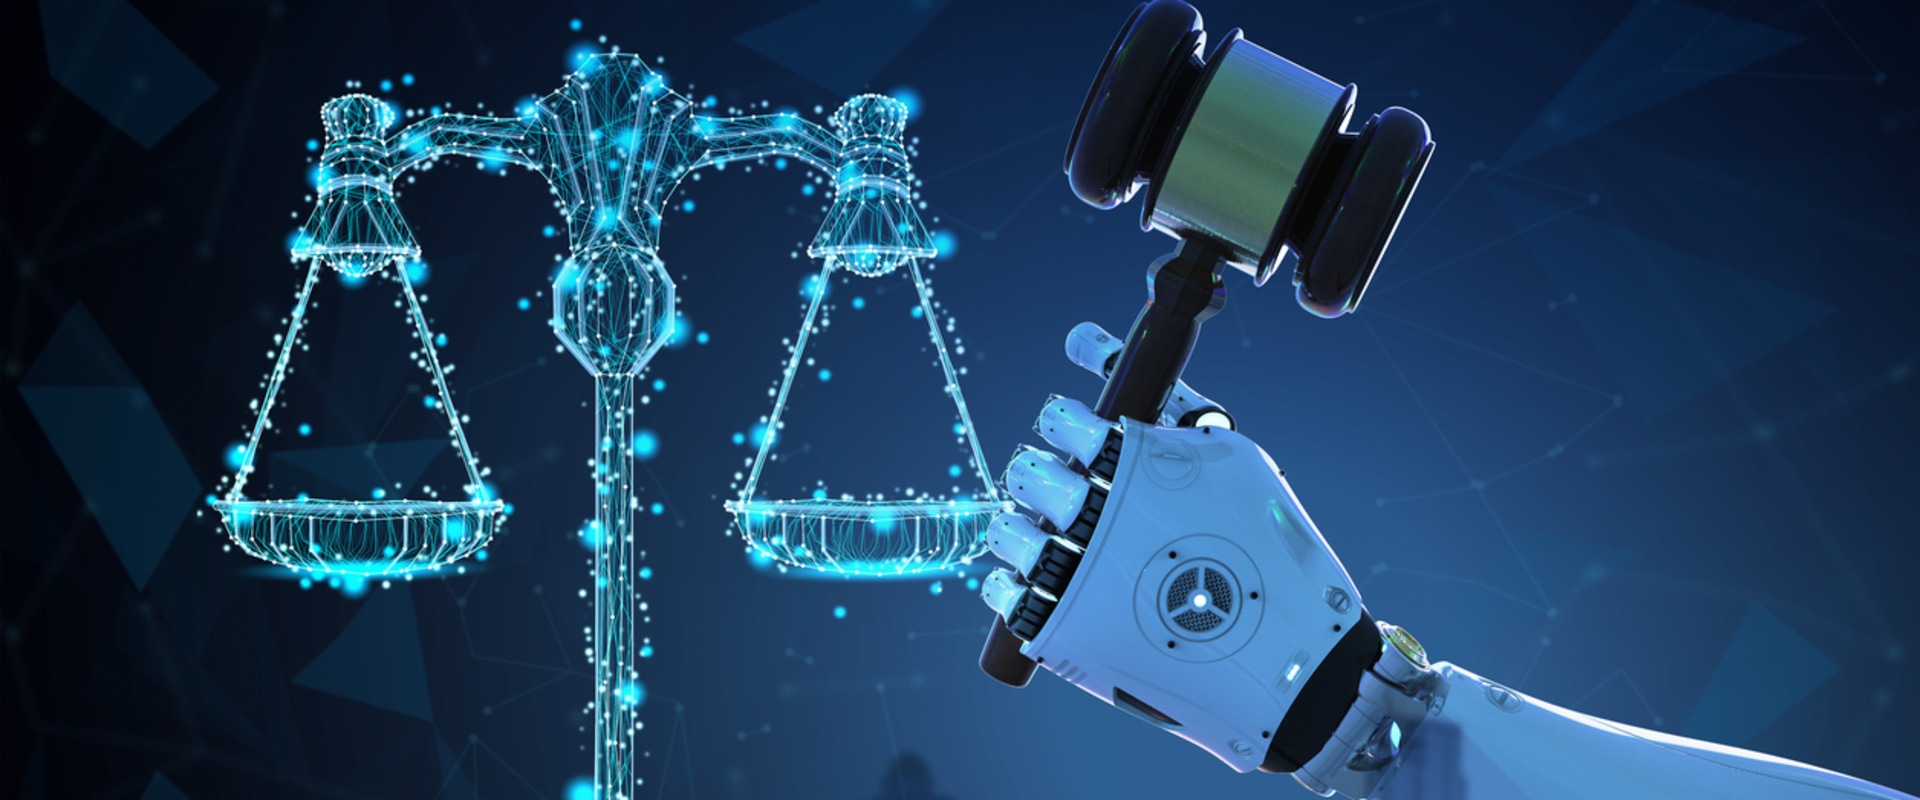 What are the legal and ethical issues in artificial intelligence?